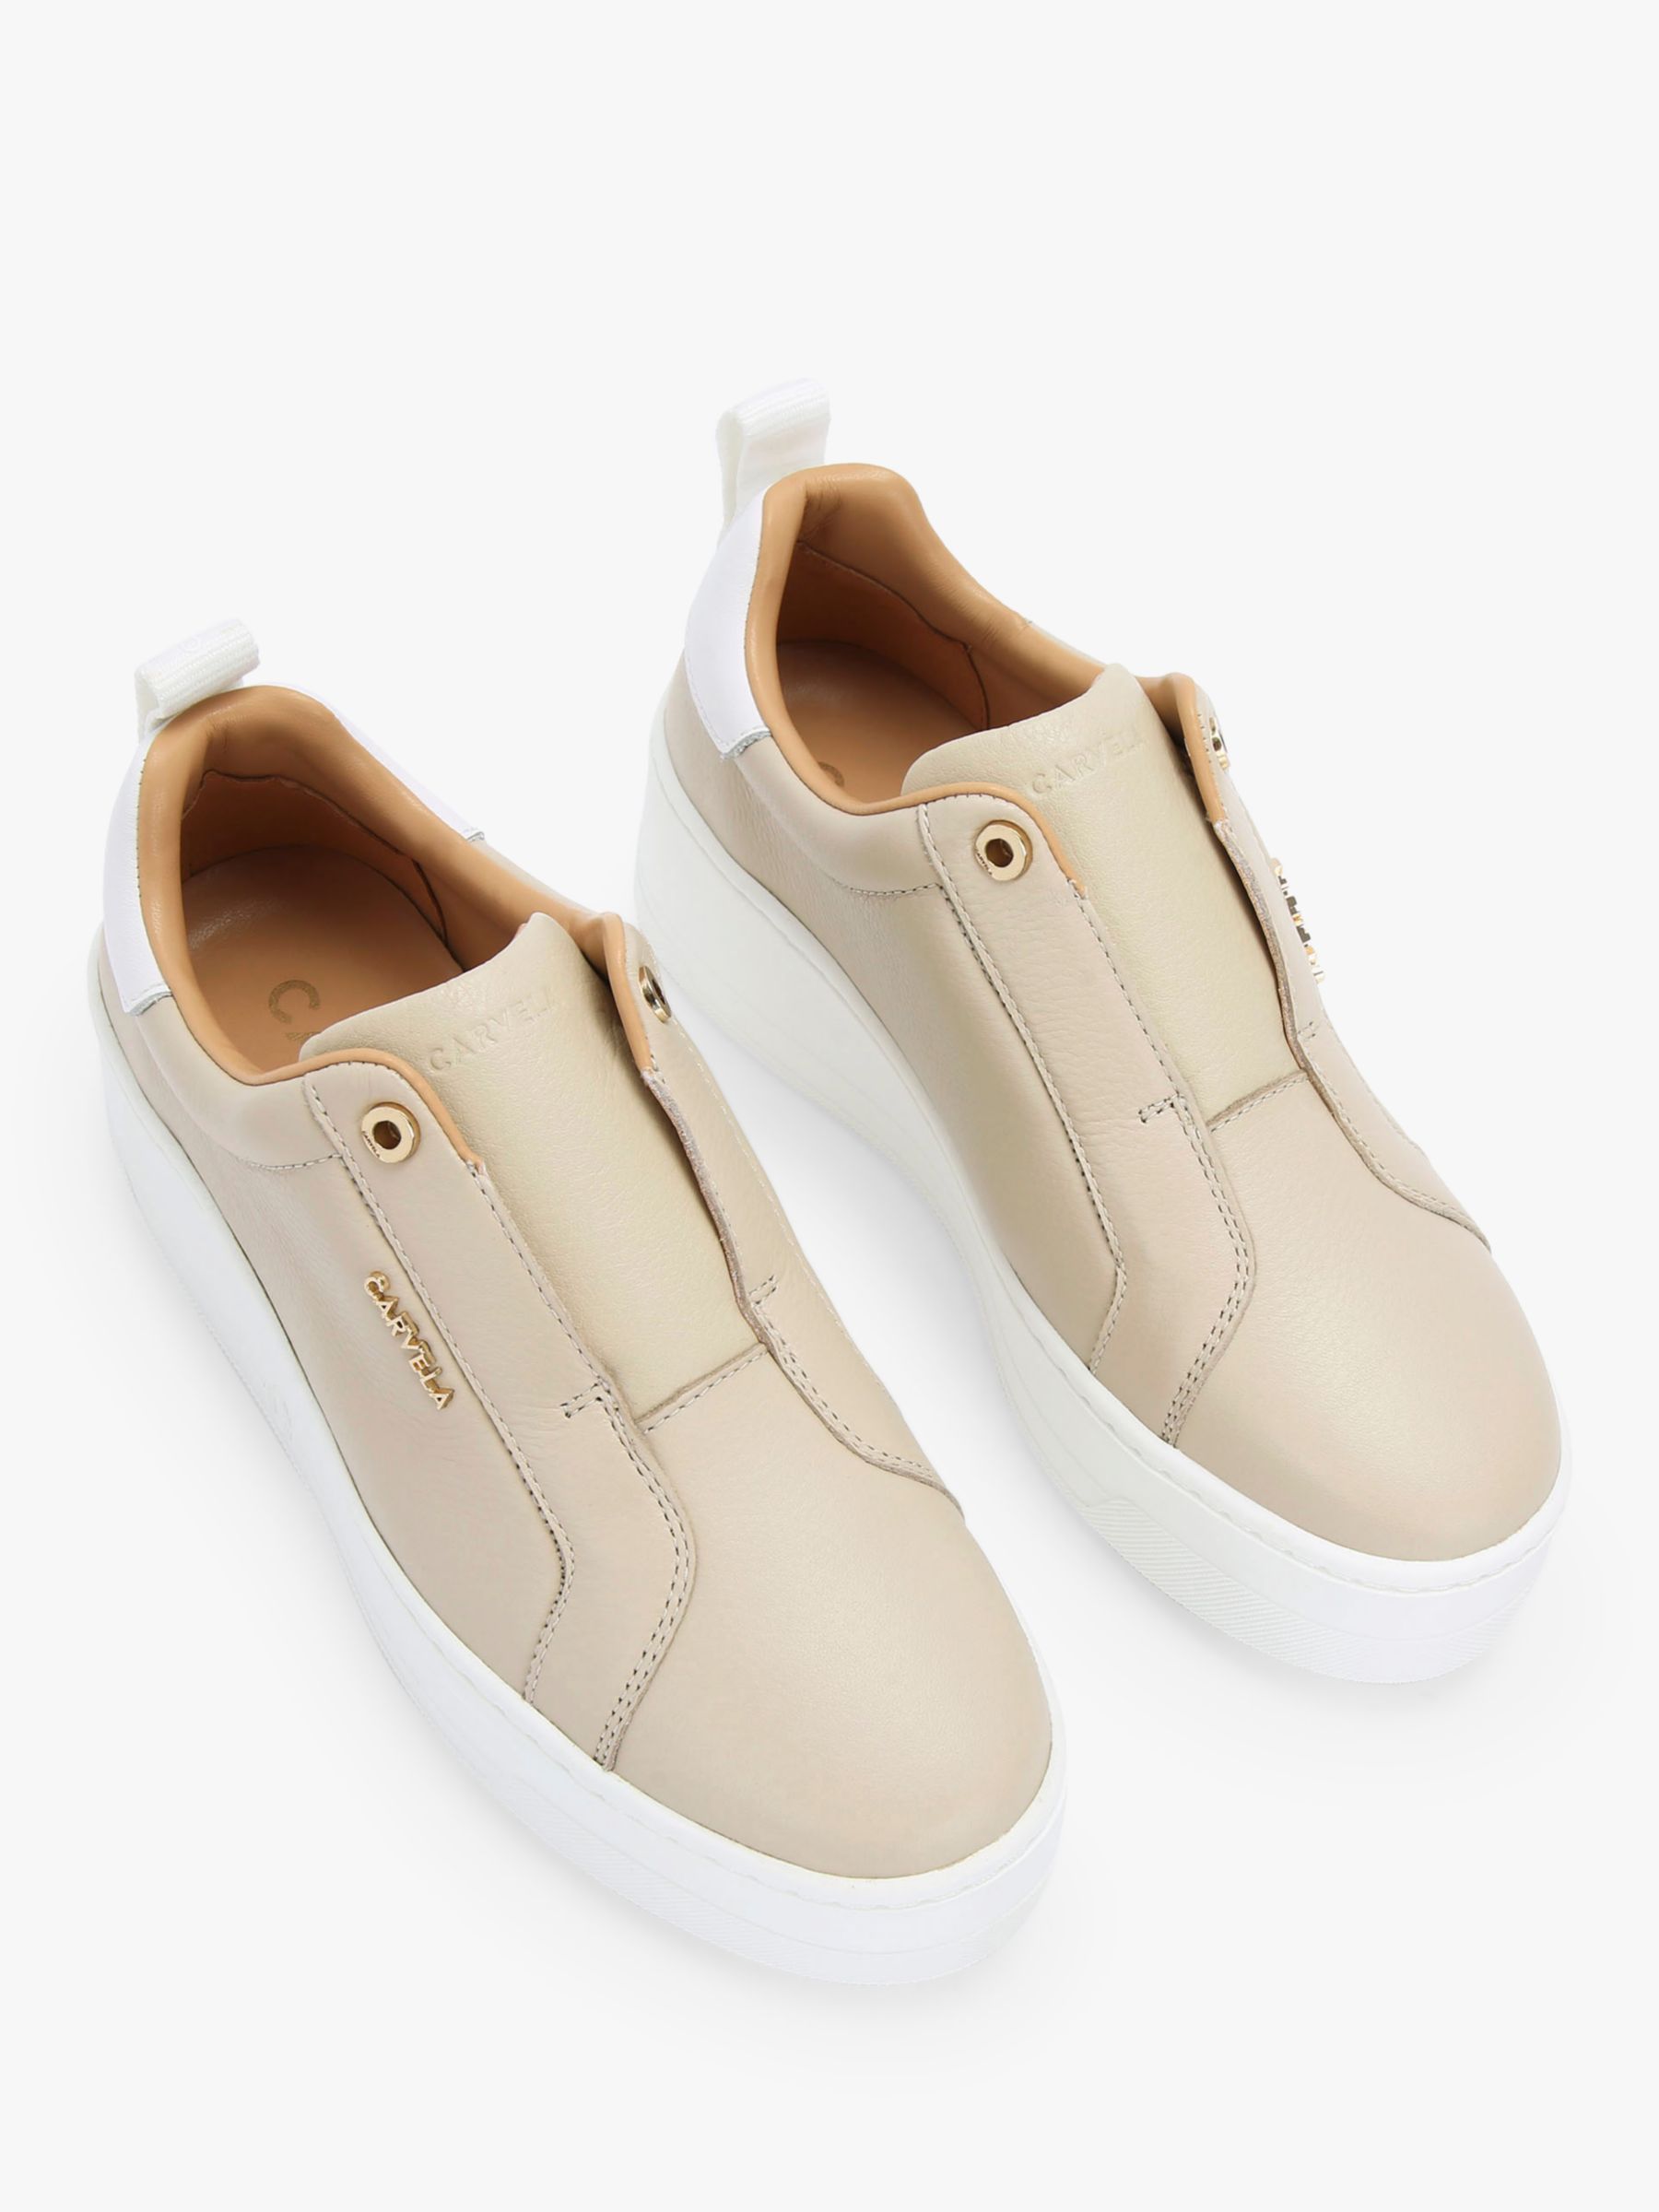 Carvela Connected Leather Trainers, Natural Taupe at John Lewis & Partners